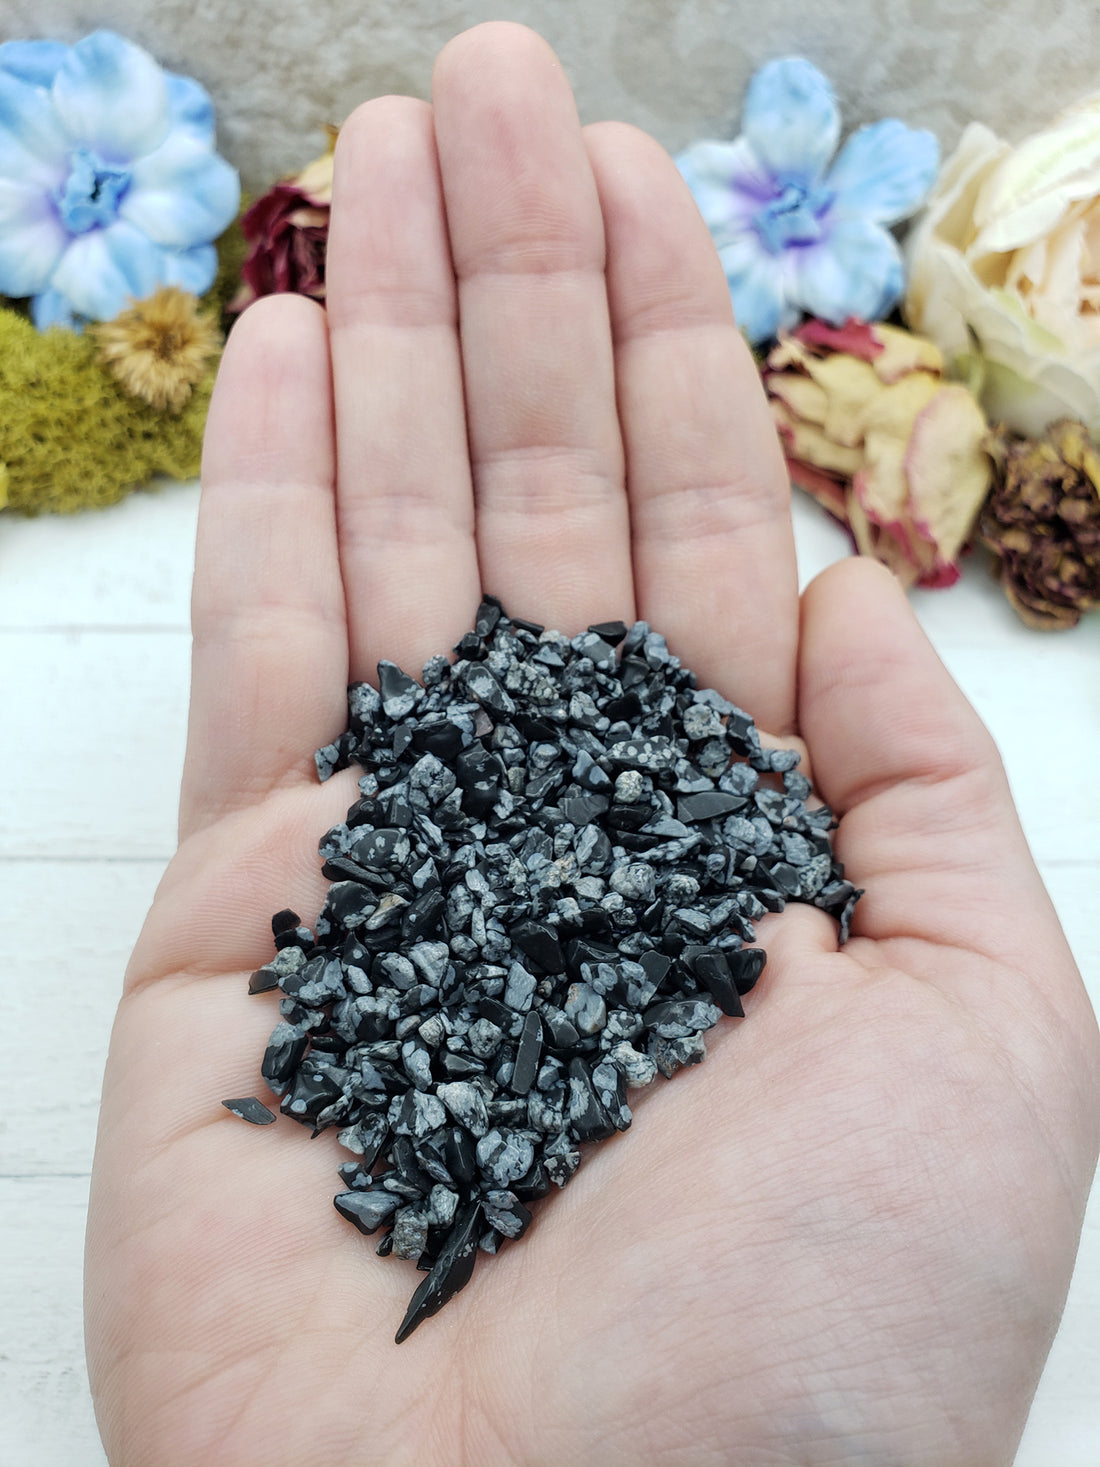 one ounce of snowflake obsidian crystal chips